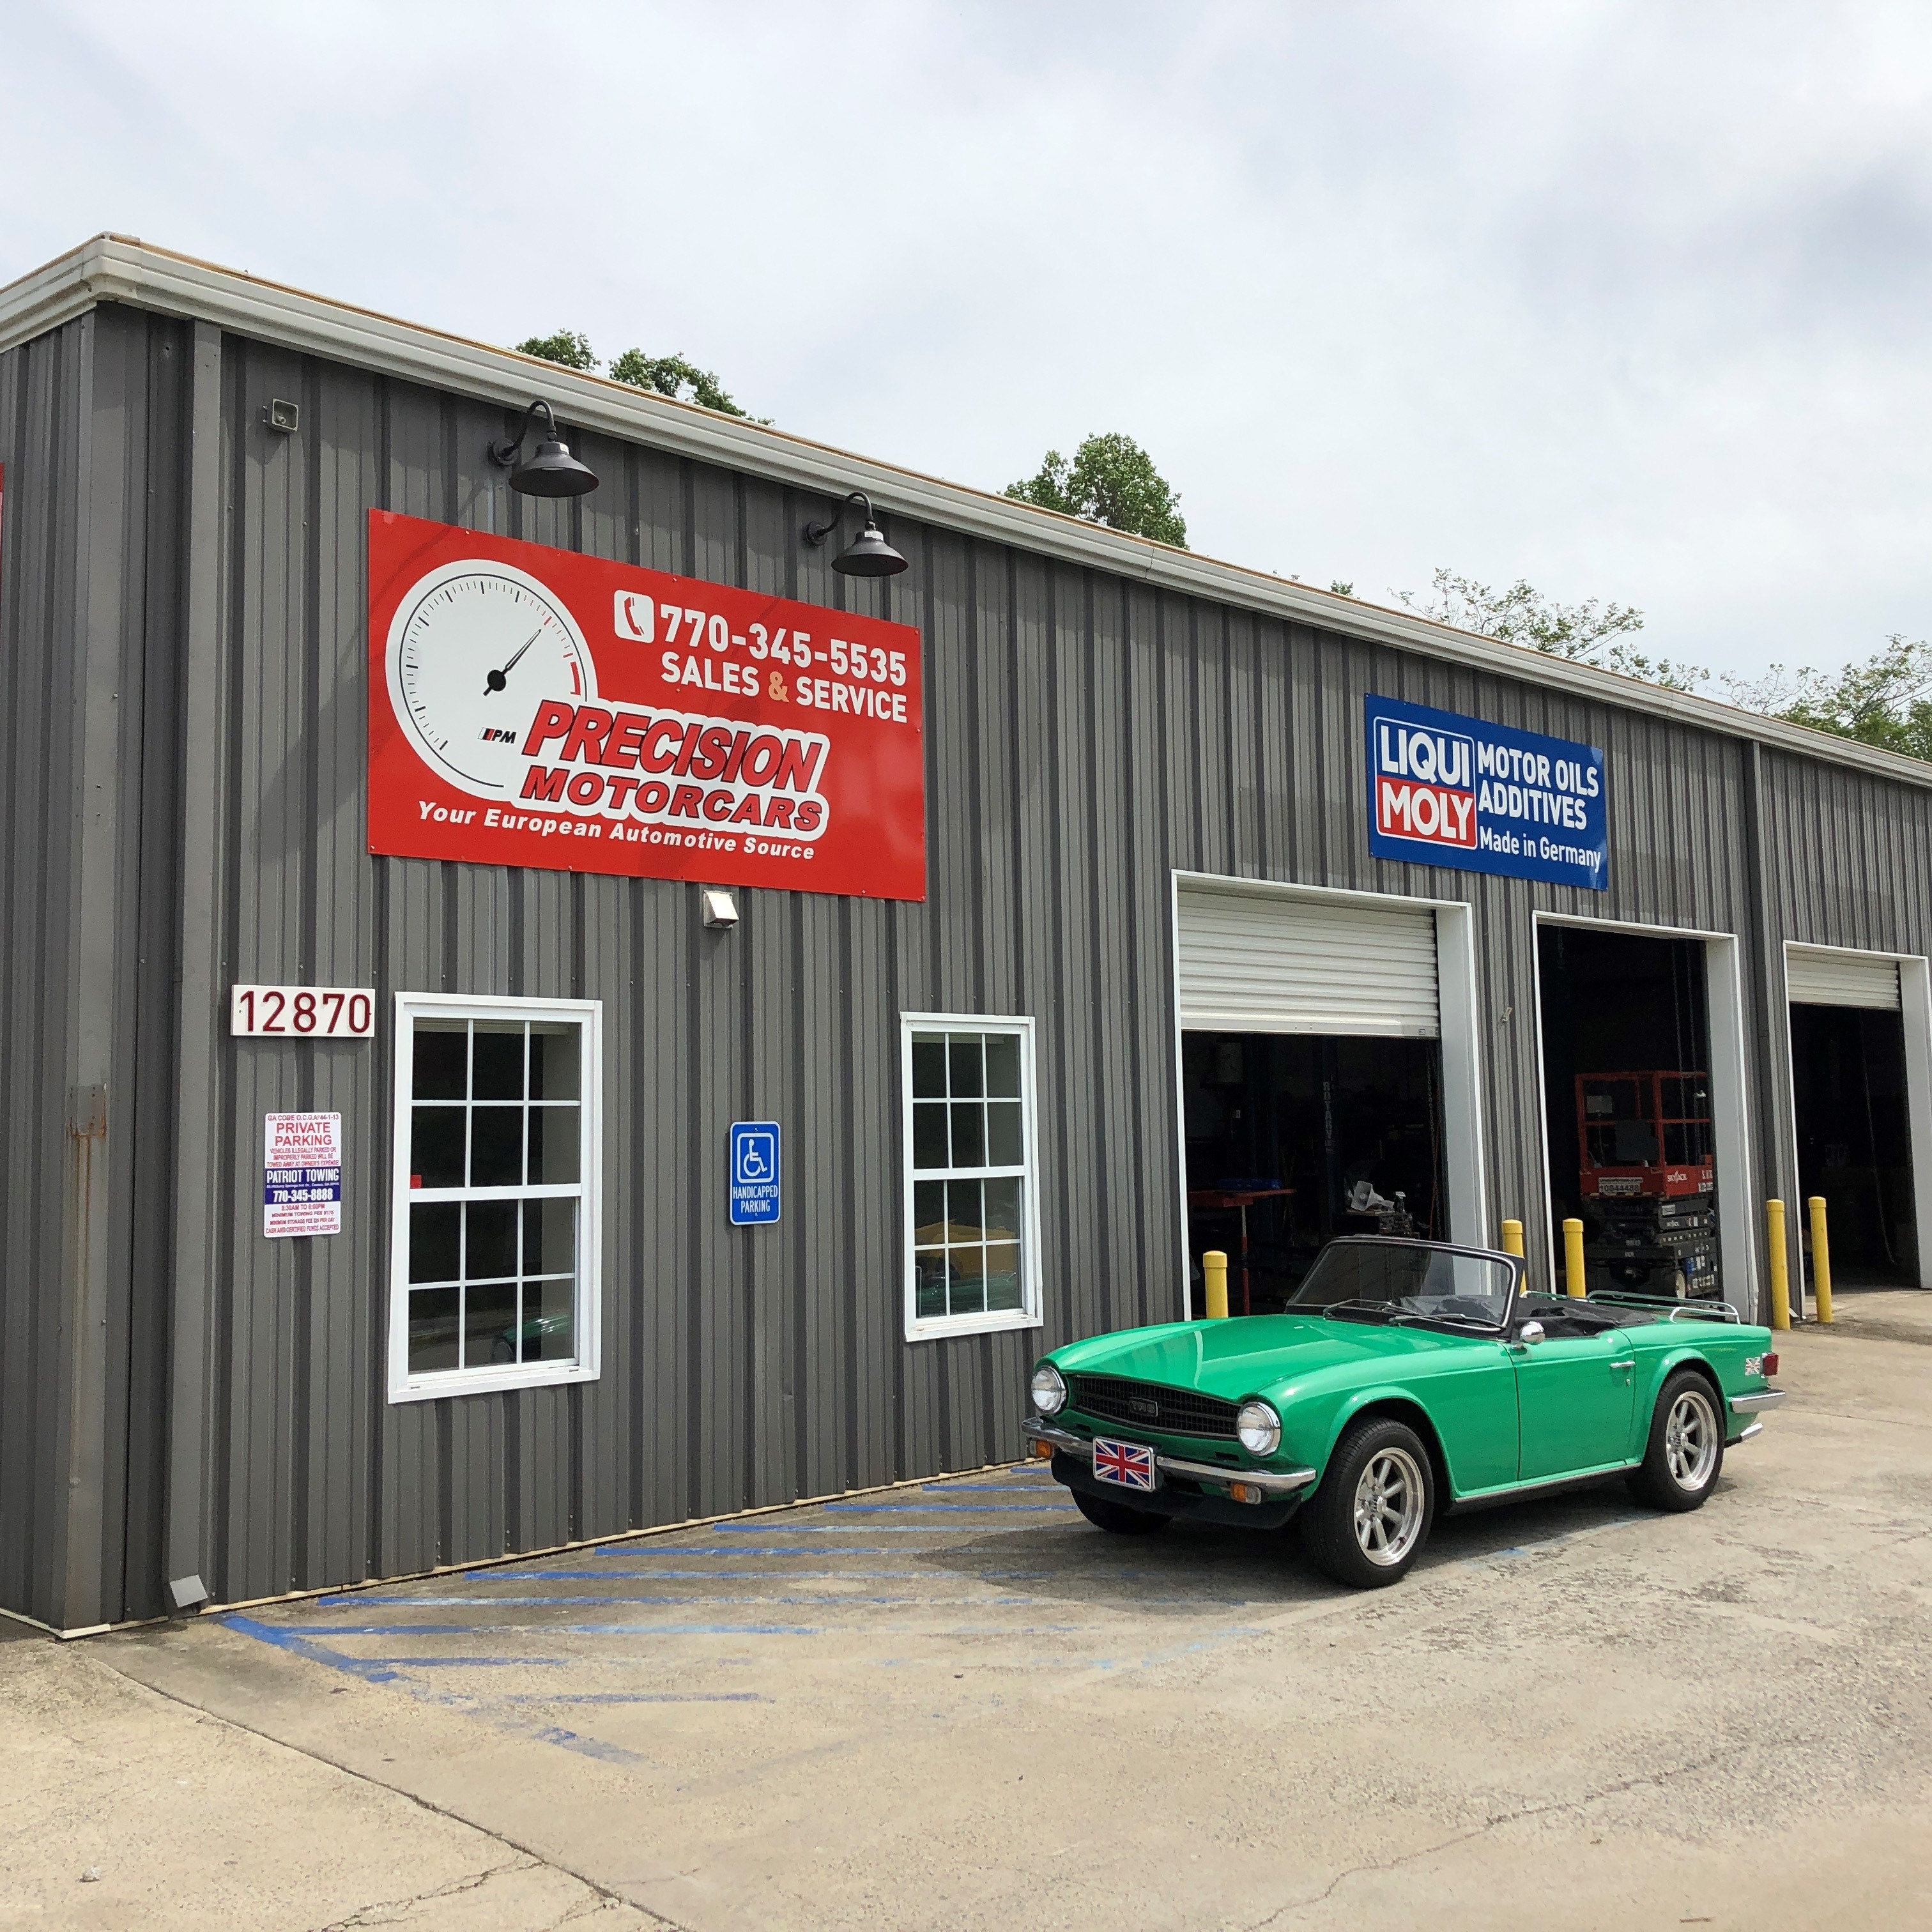 At Precision Motorcars Auto Repair, we have over 40 years of combined experience servicing all models of BMW, Volvo, Volkswagen, Mercedes, Jaguar, Porsche, and more.